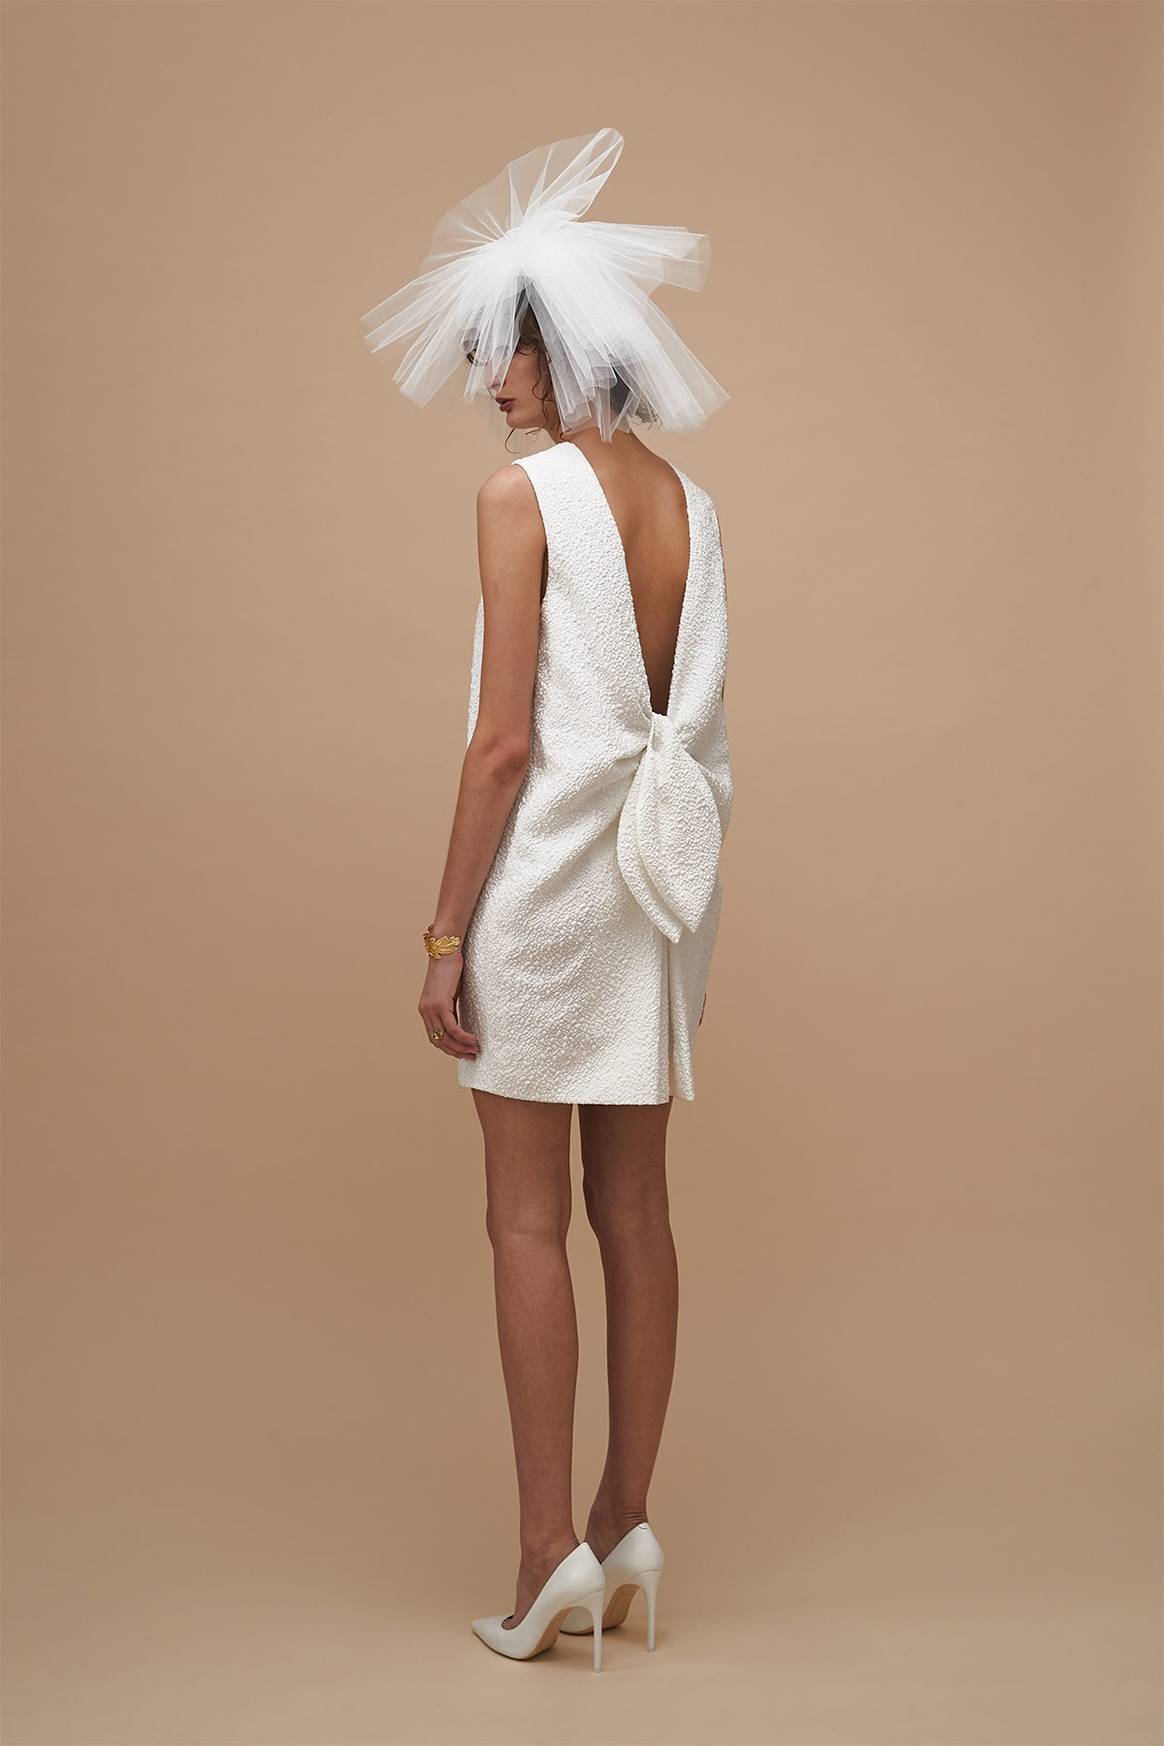 Karen Walker debuts bespoke bridal atelier for gowns and jewelry